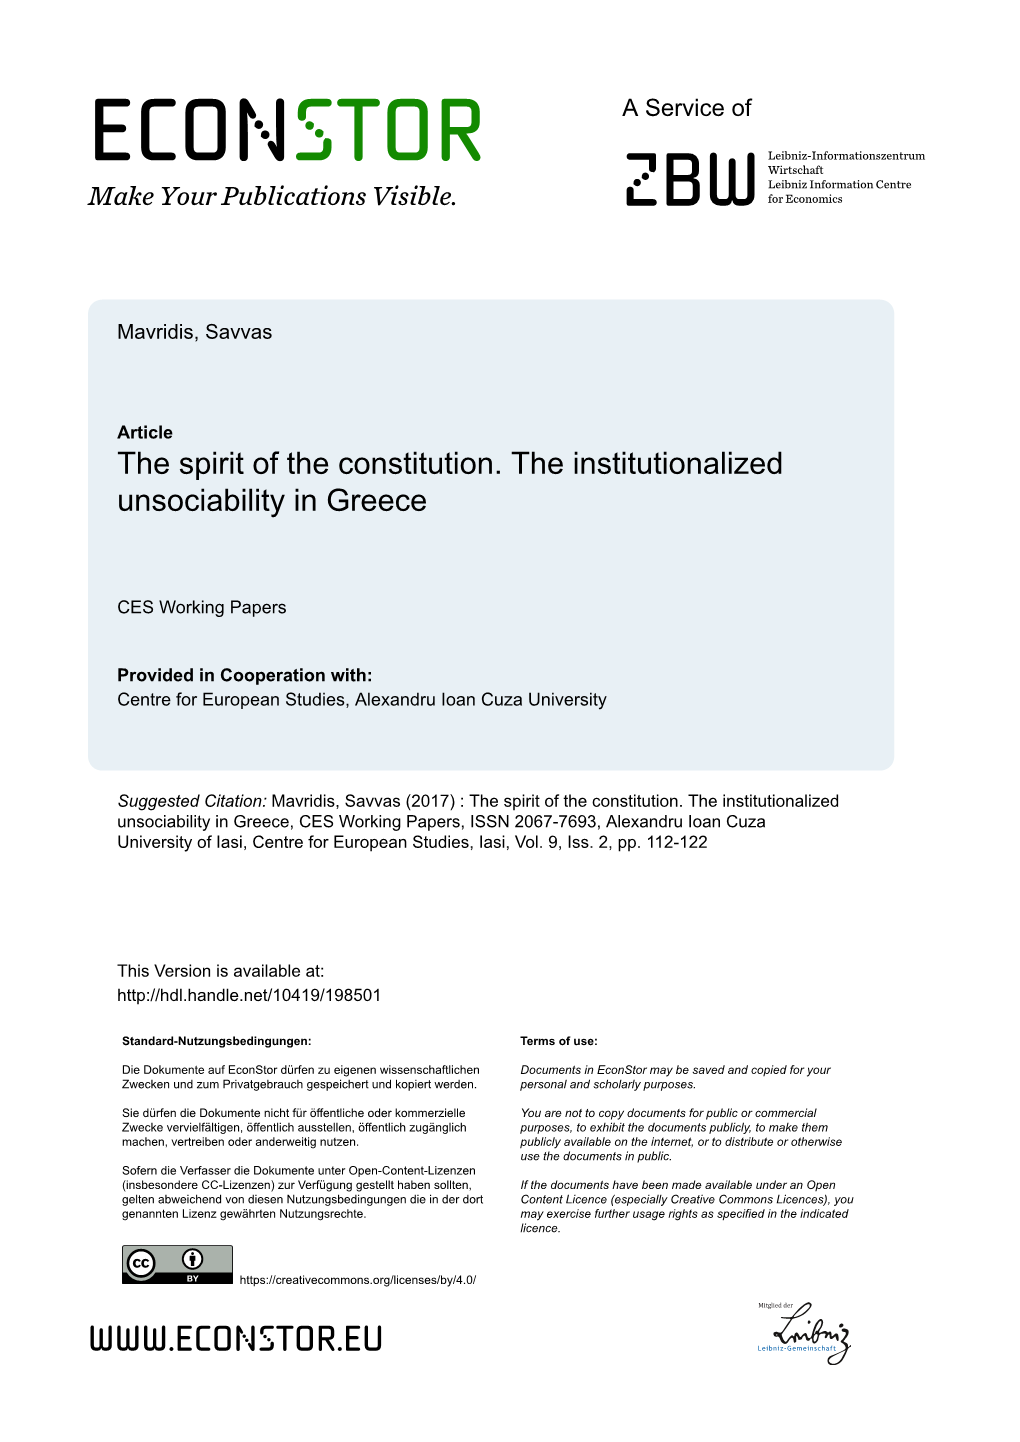 The Spirit of the Constitution. the Institutionalized Unsociability in Greece